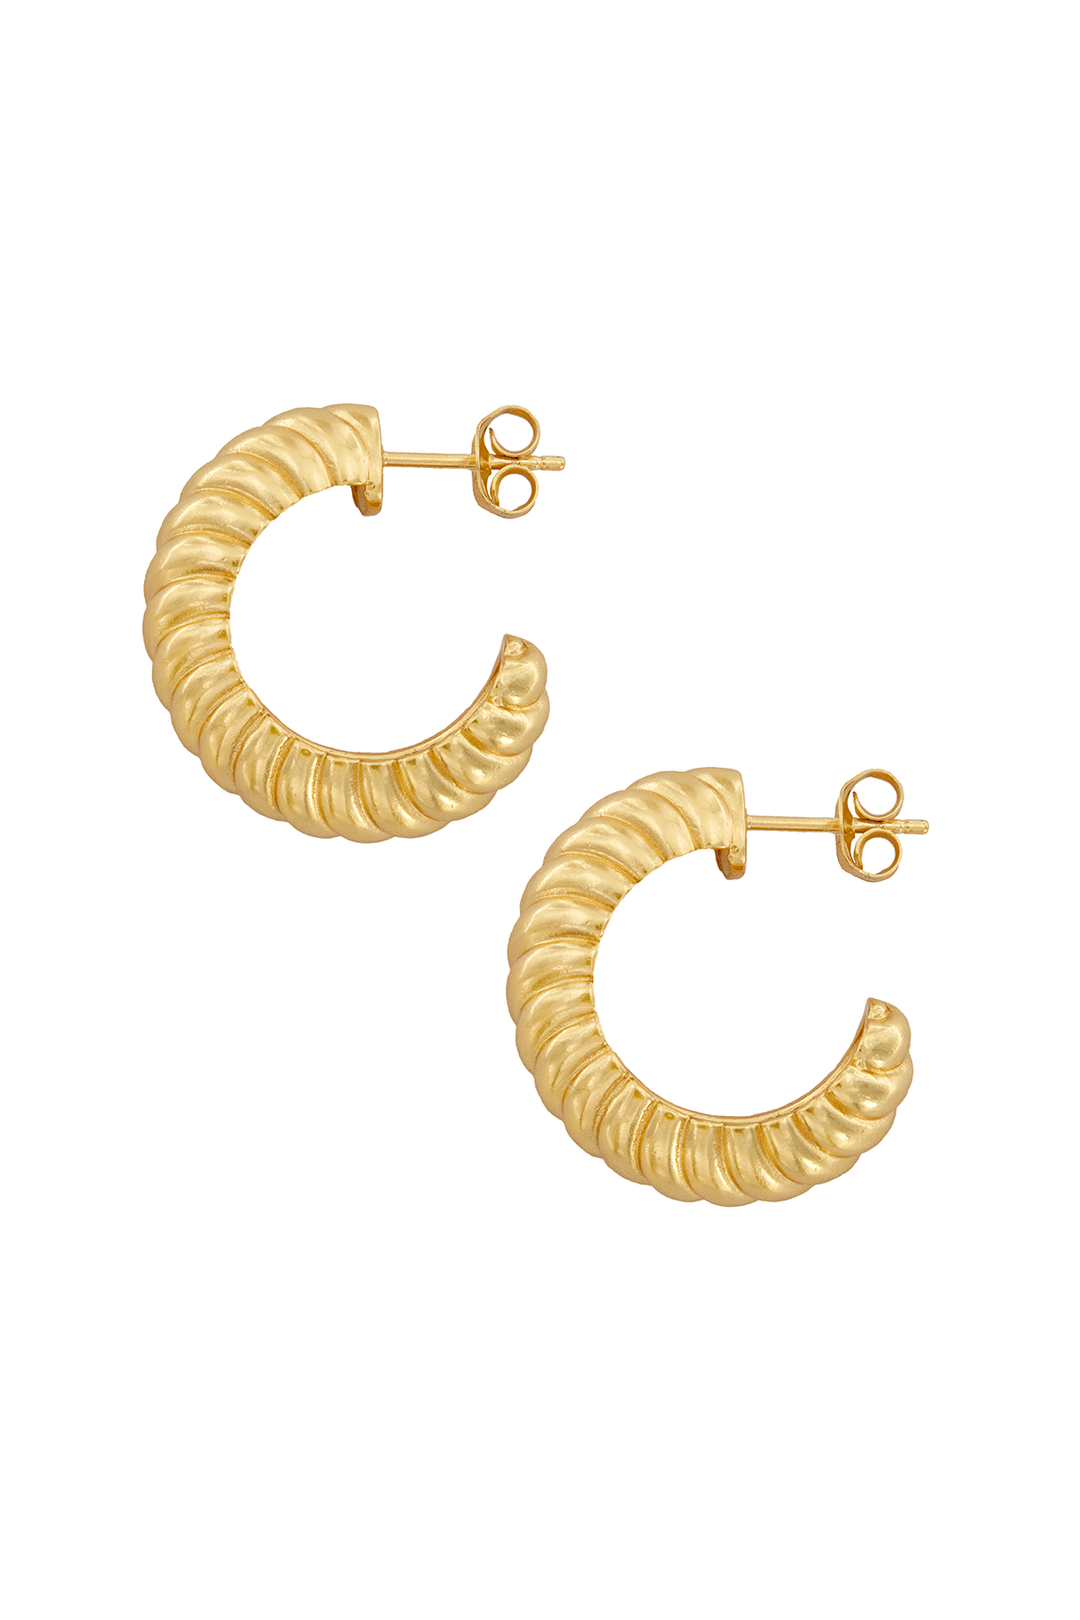 Pyar Saturn Gold Stud Hoop Earring, available on ZERRIN with free local Singapore shipping 